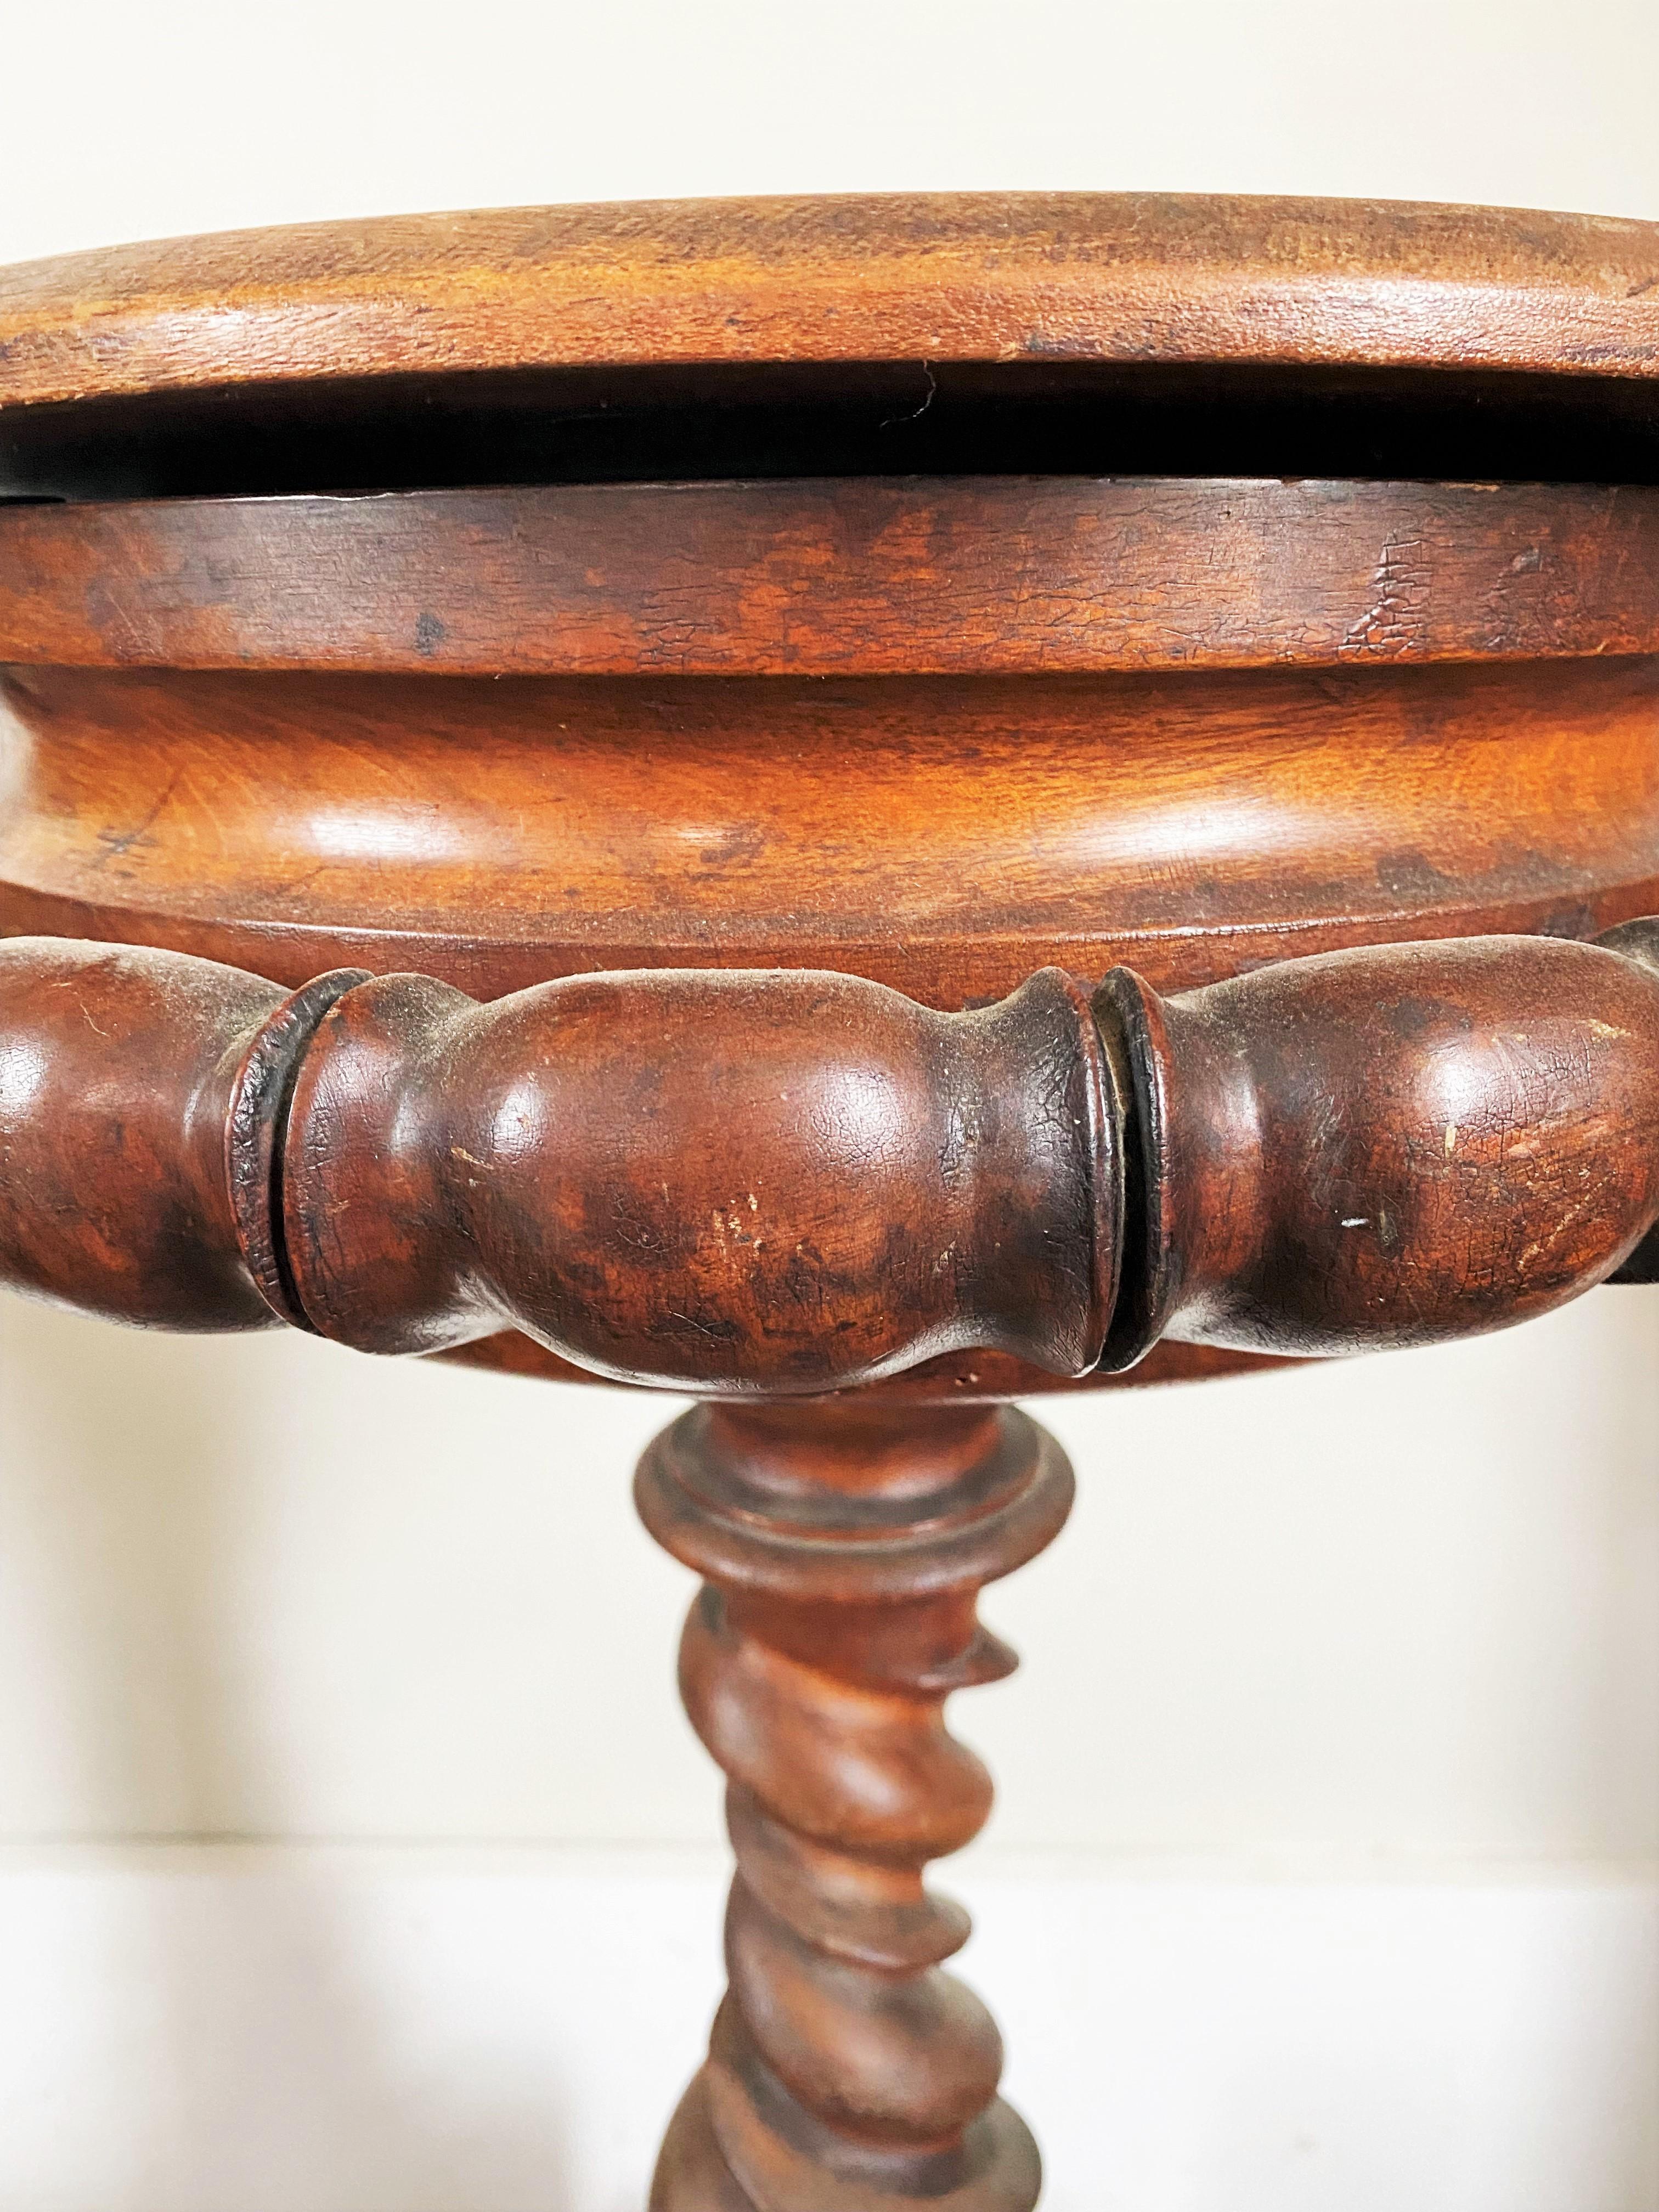 Very nice Napoleon 3 period planter. The wood is richly carved, the central base is turned in a spiral is inspired by Louis 13 style and, on the part that can be opened, there is a horizontal rosary turning, both characteristic of this style. The